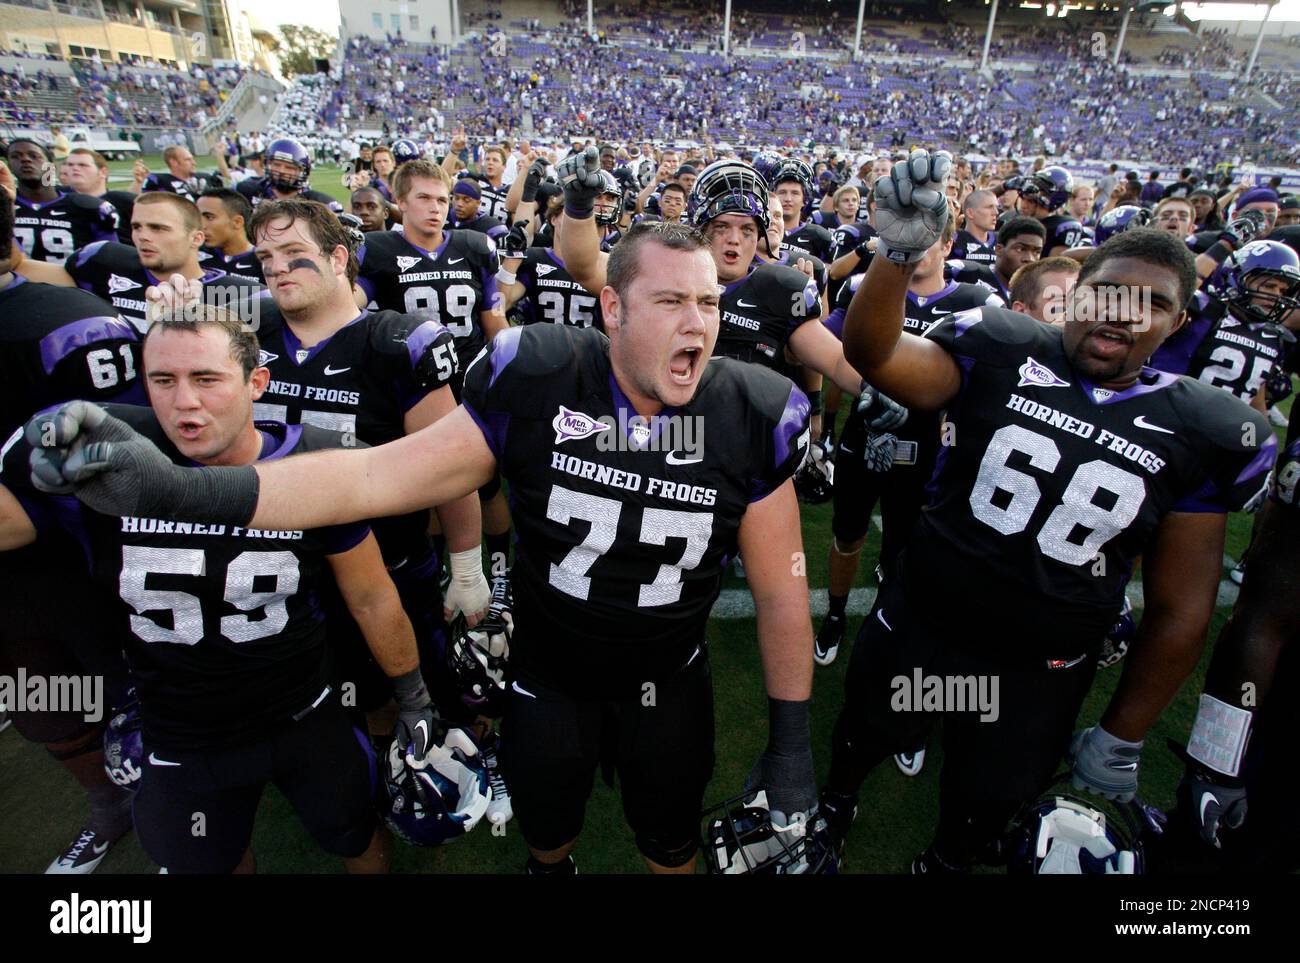 FILE - In this Sept. 18, 2010, file photo TCU's Logan Sligar (59), Spencer Thompson (77) and Trevius Jones (68) lead their teammates in song along with the student body in the stands following an NCAA college football game against Baylor. After 80 years, TCU's campus stadium is set for a major modernizing renovation. (AP Photo/Tony Gutierrez, file) Stock Photo